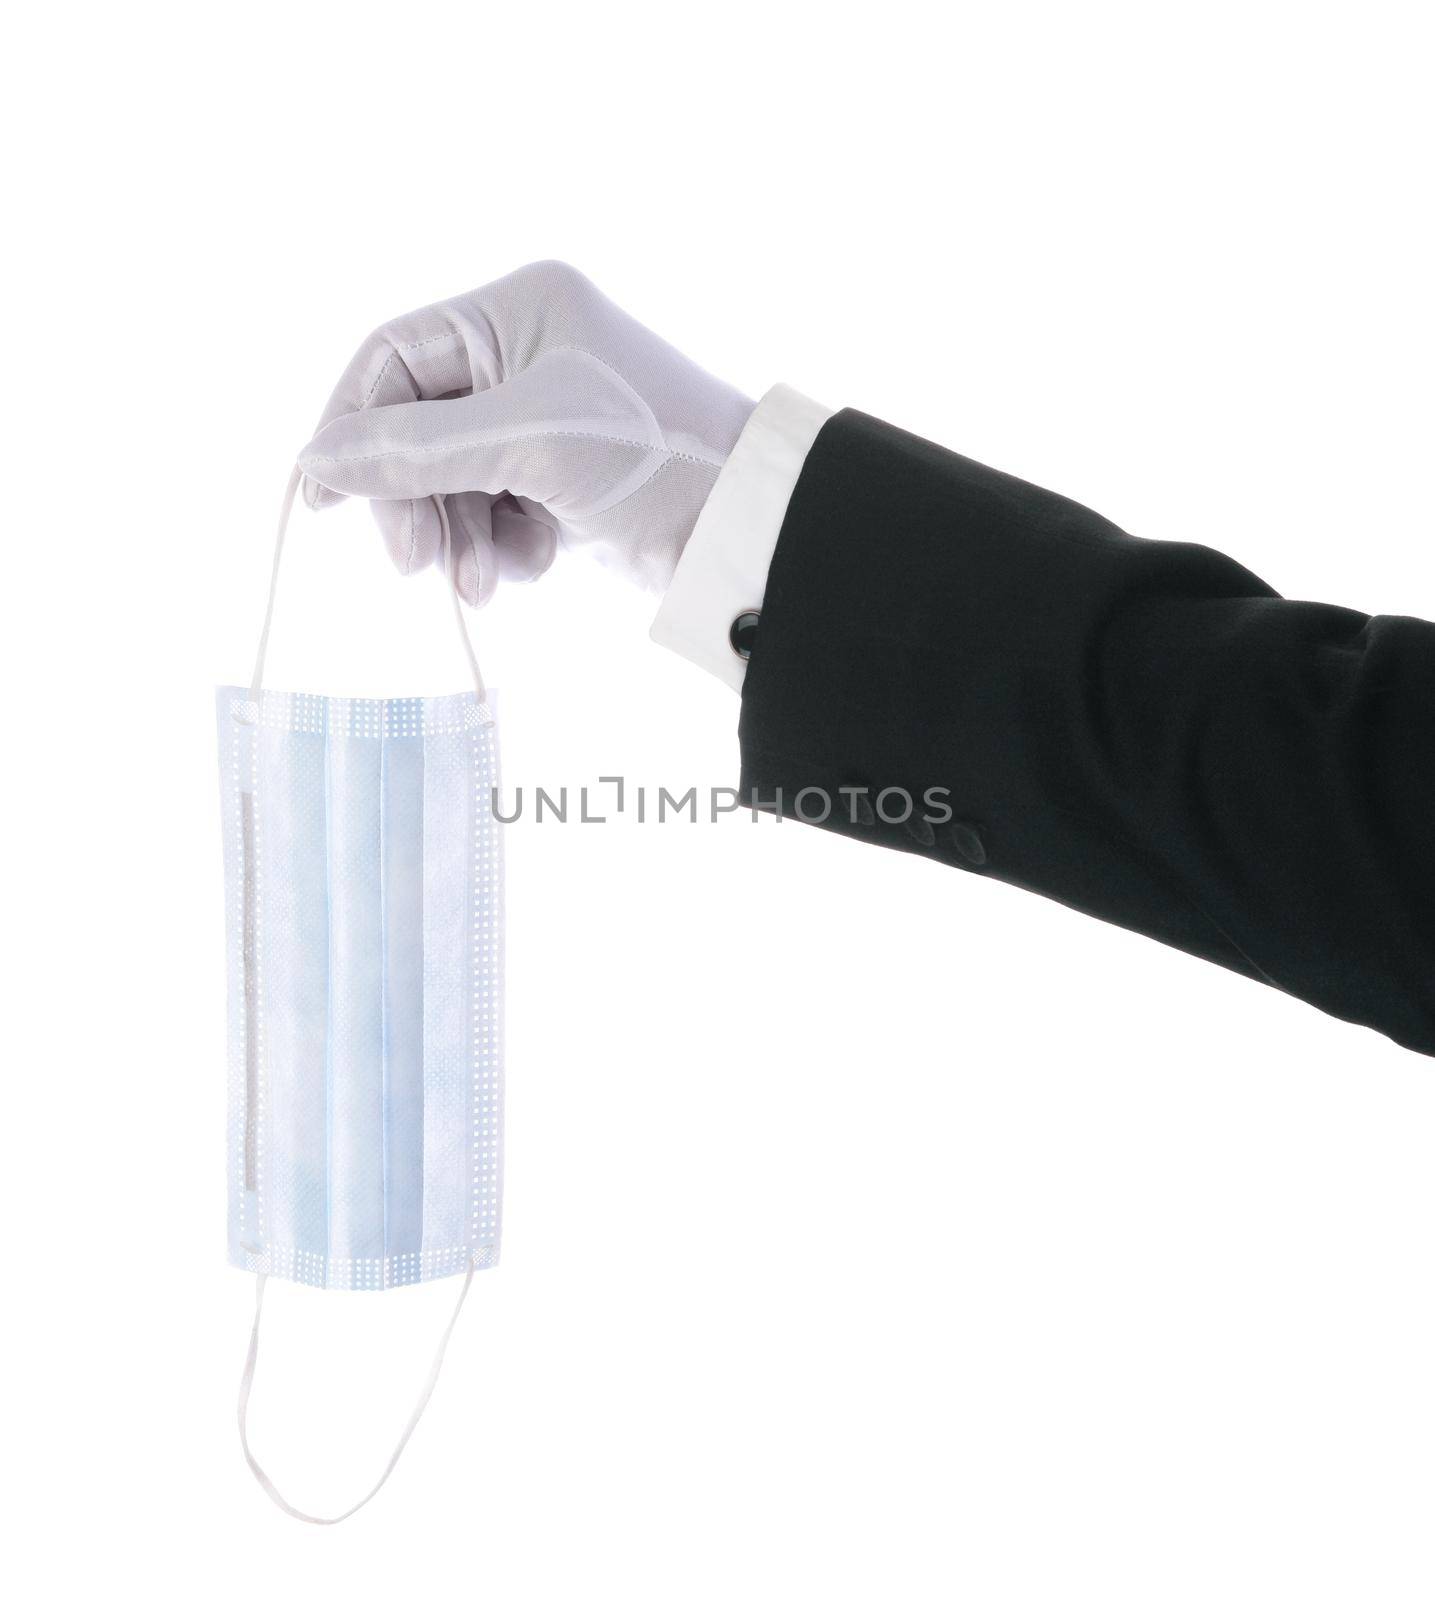 A  Tuxedo sleeve with a White Gloved hand holding a COVID-19 surgical mask over a white background. by sCukrov